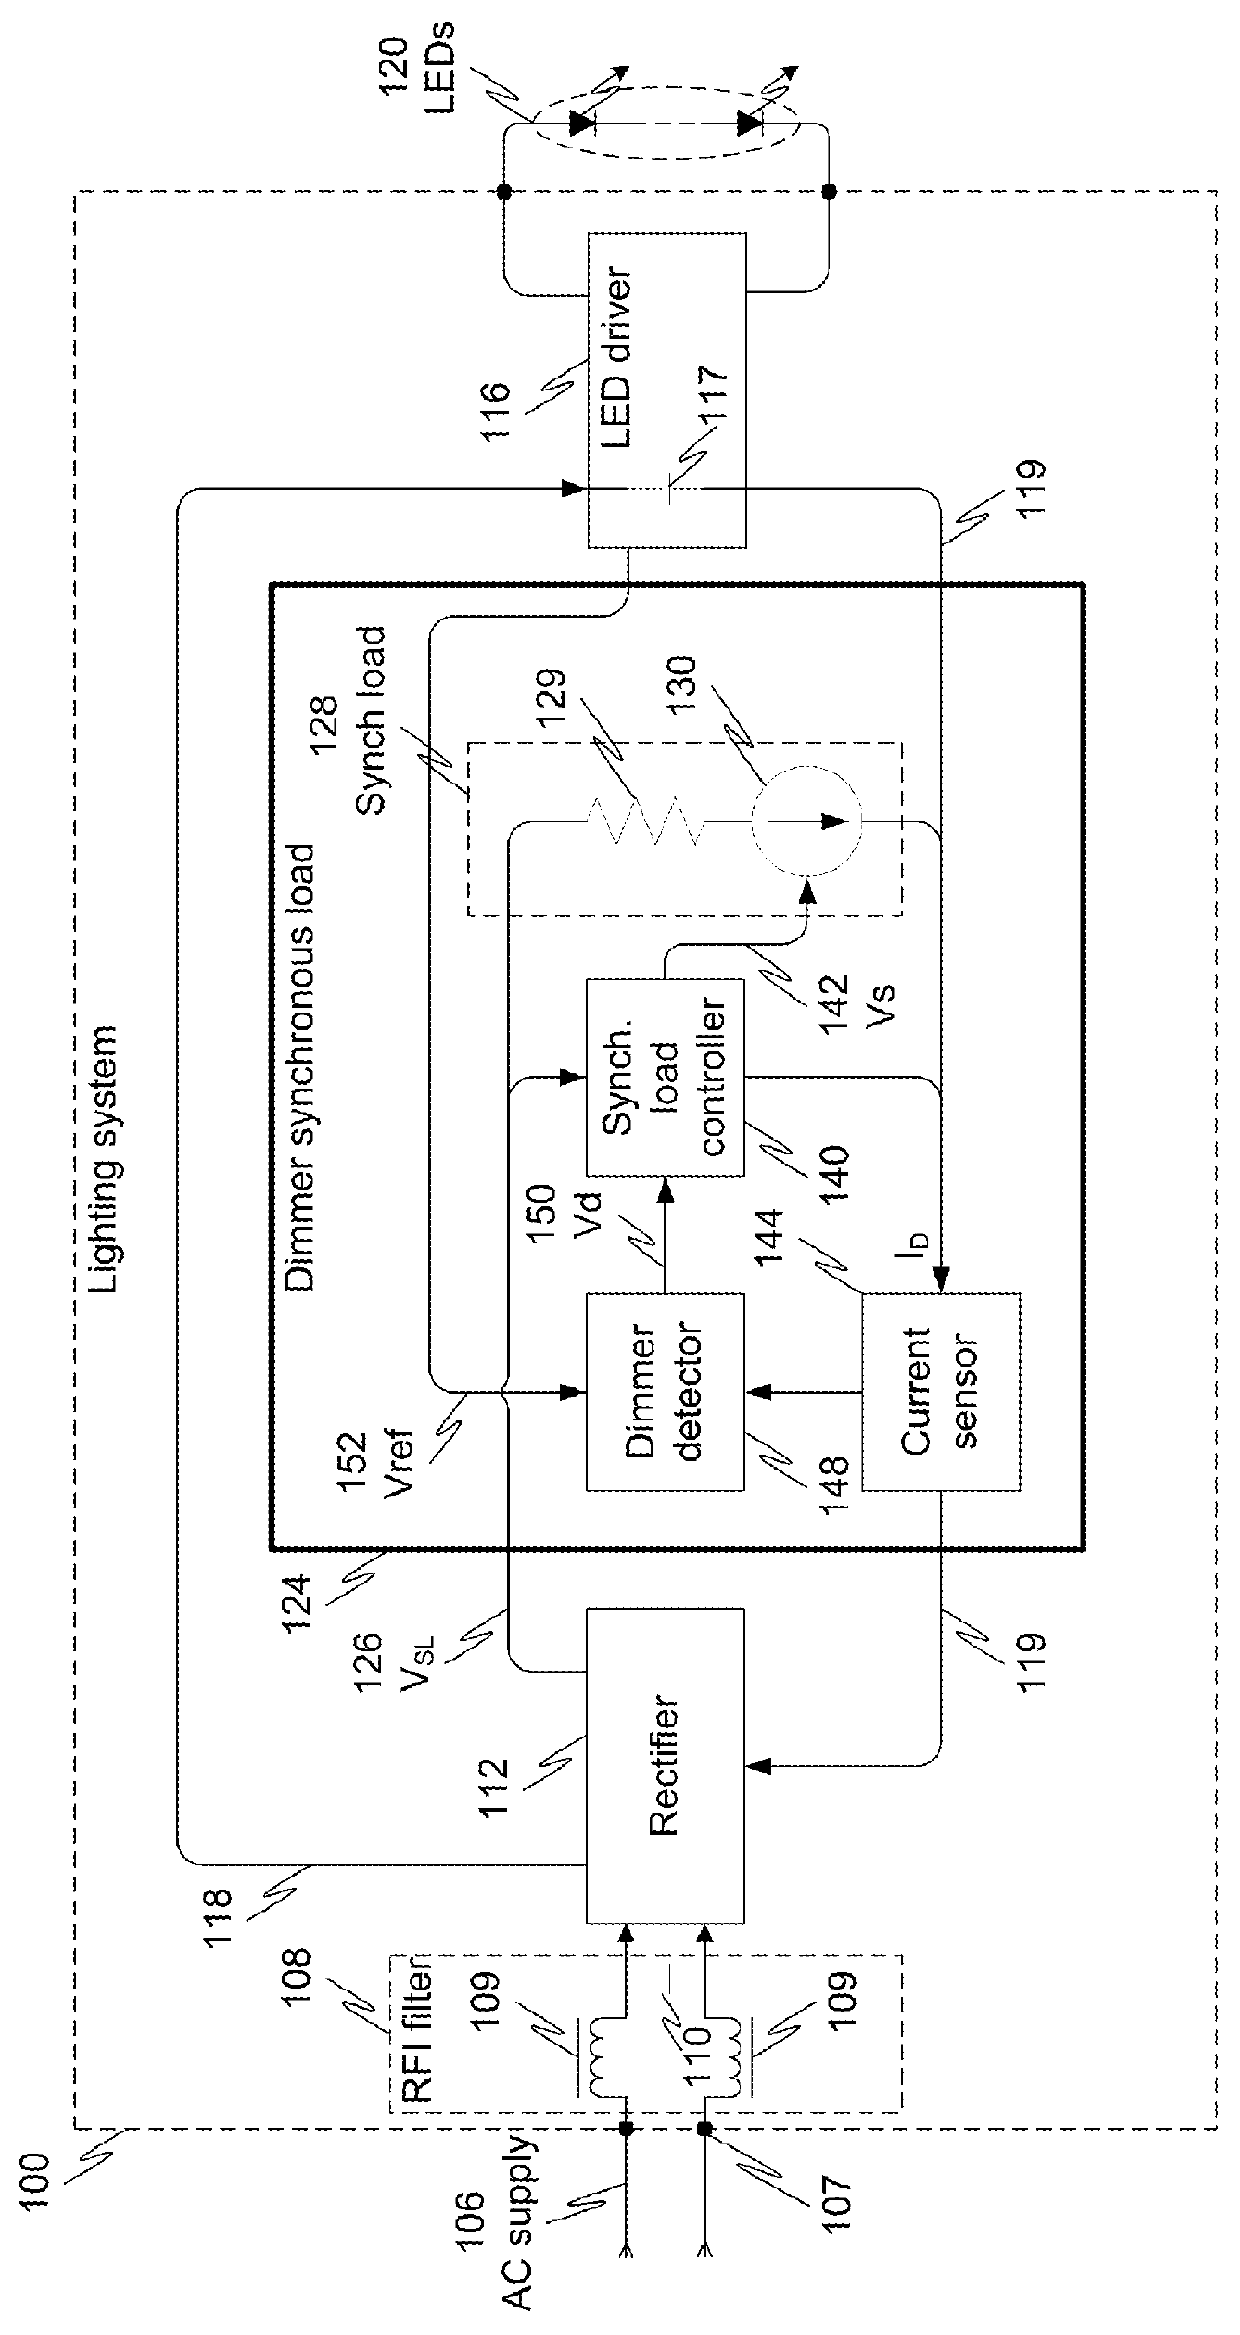 Lighting dimmer synchronous load device